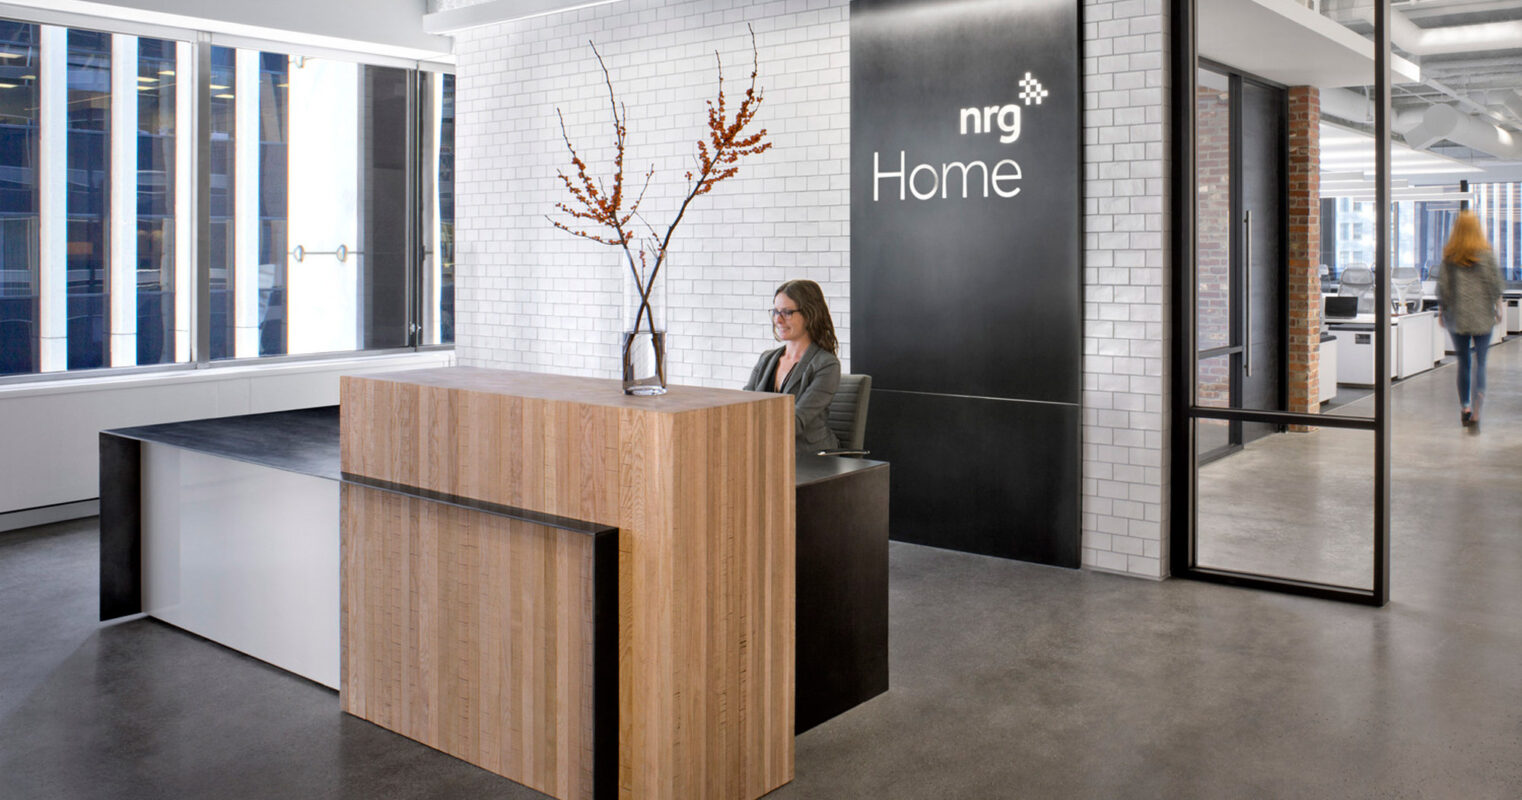 Modern, minimalist reception area featuring a sleek, wooden desk with a clear vase of tall branches. The design incorporates ample natural light, clean lines, and a neutral color palette, complemented by industrial-style doors and concrete flooring.